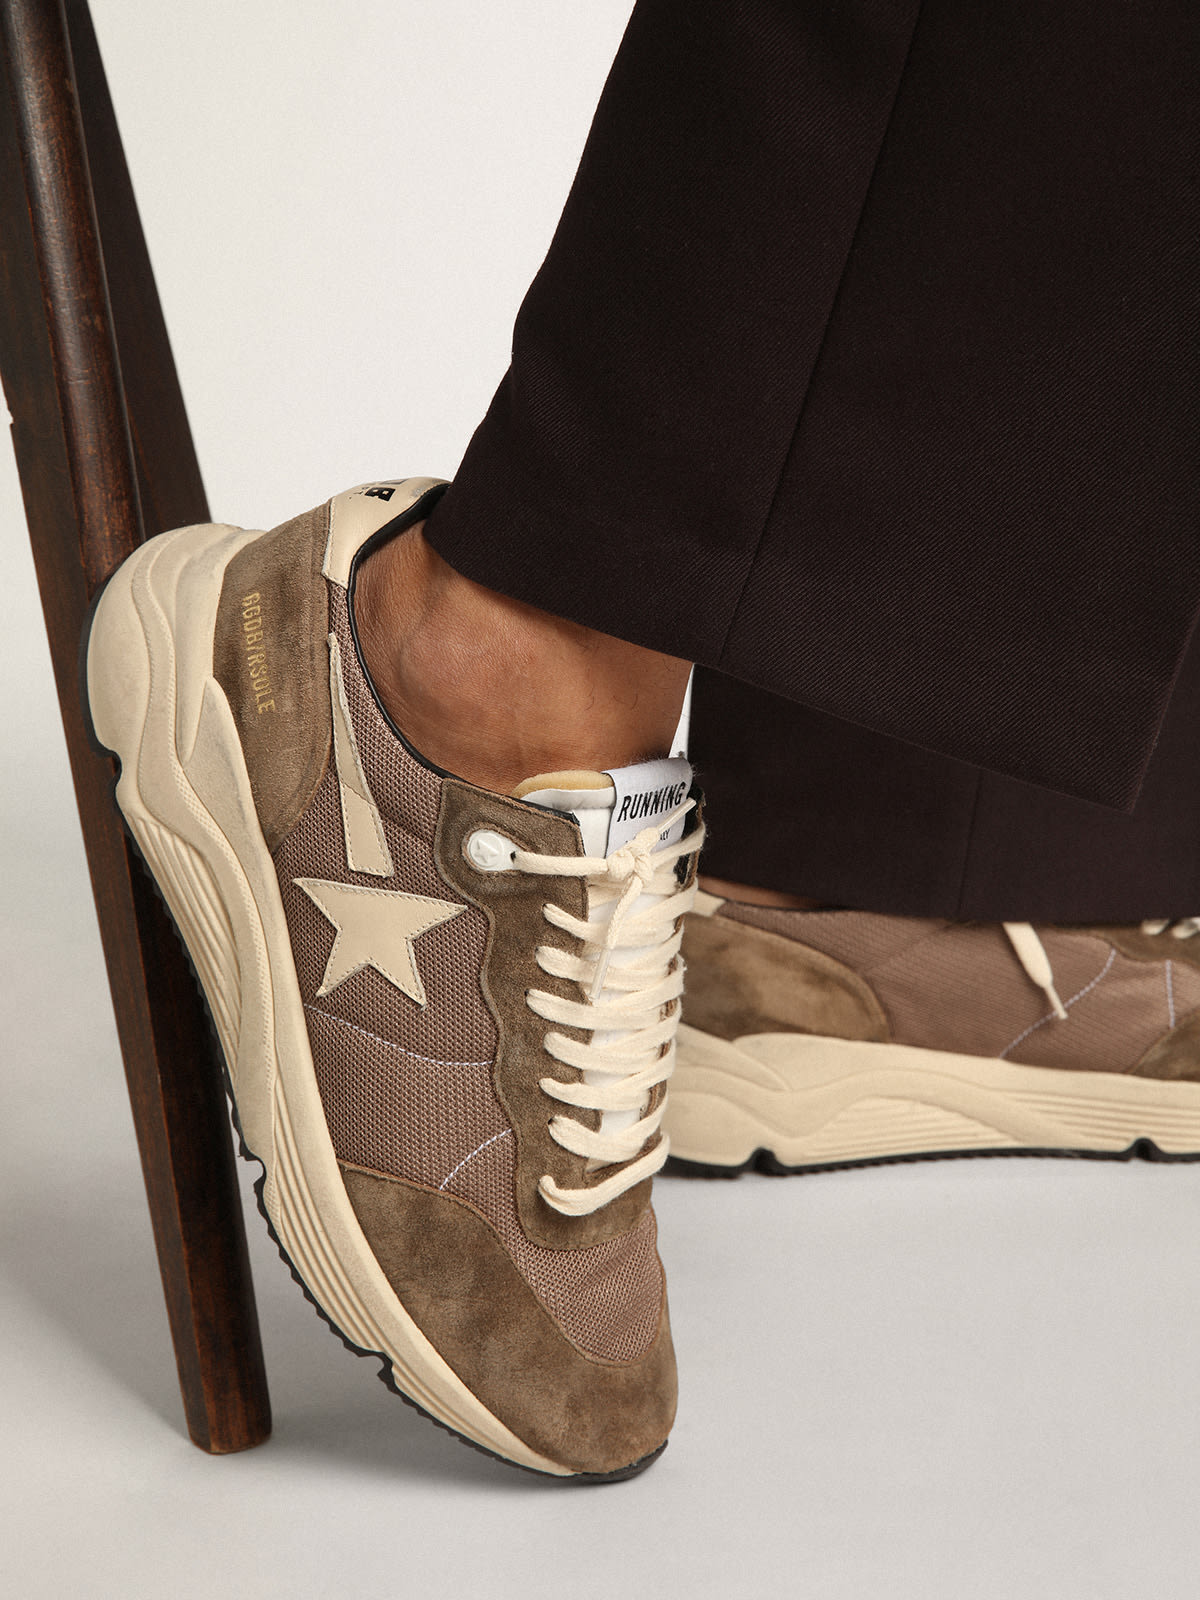 Golden Goose - Running Sole sneakers in olive-green mesh and leather with cream-colored leather star and heel tab in 